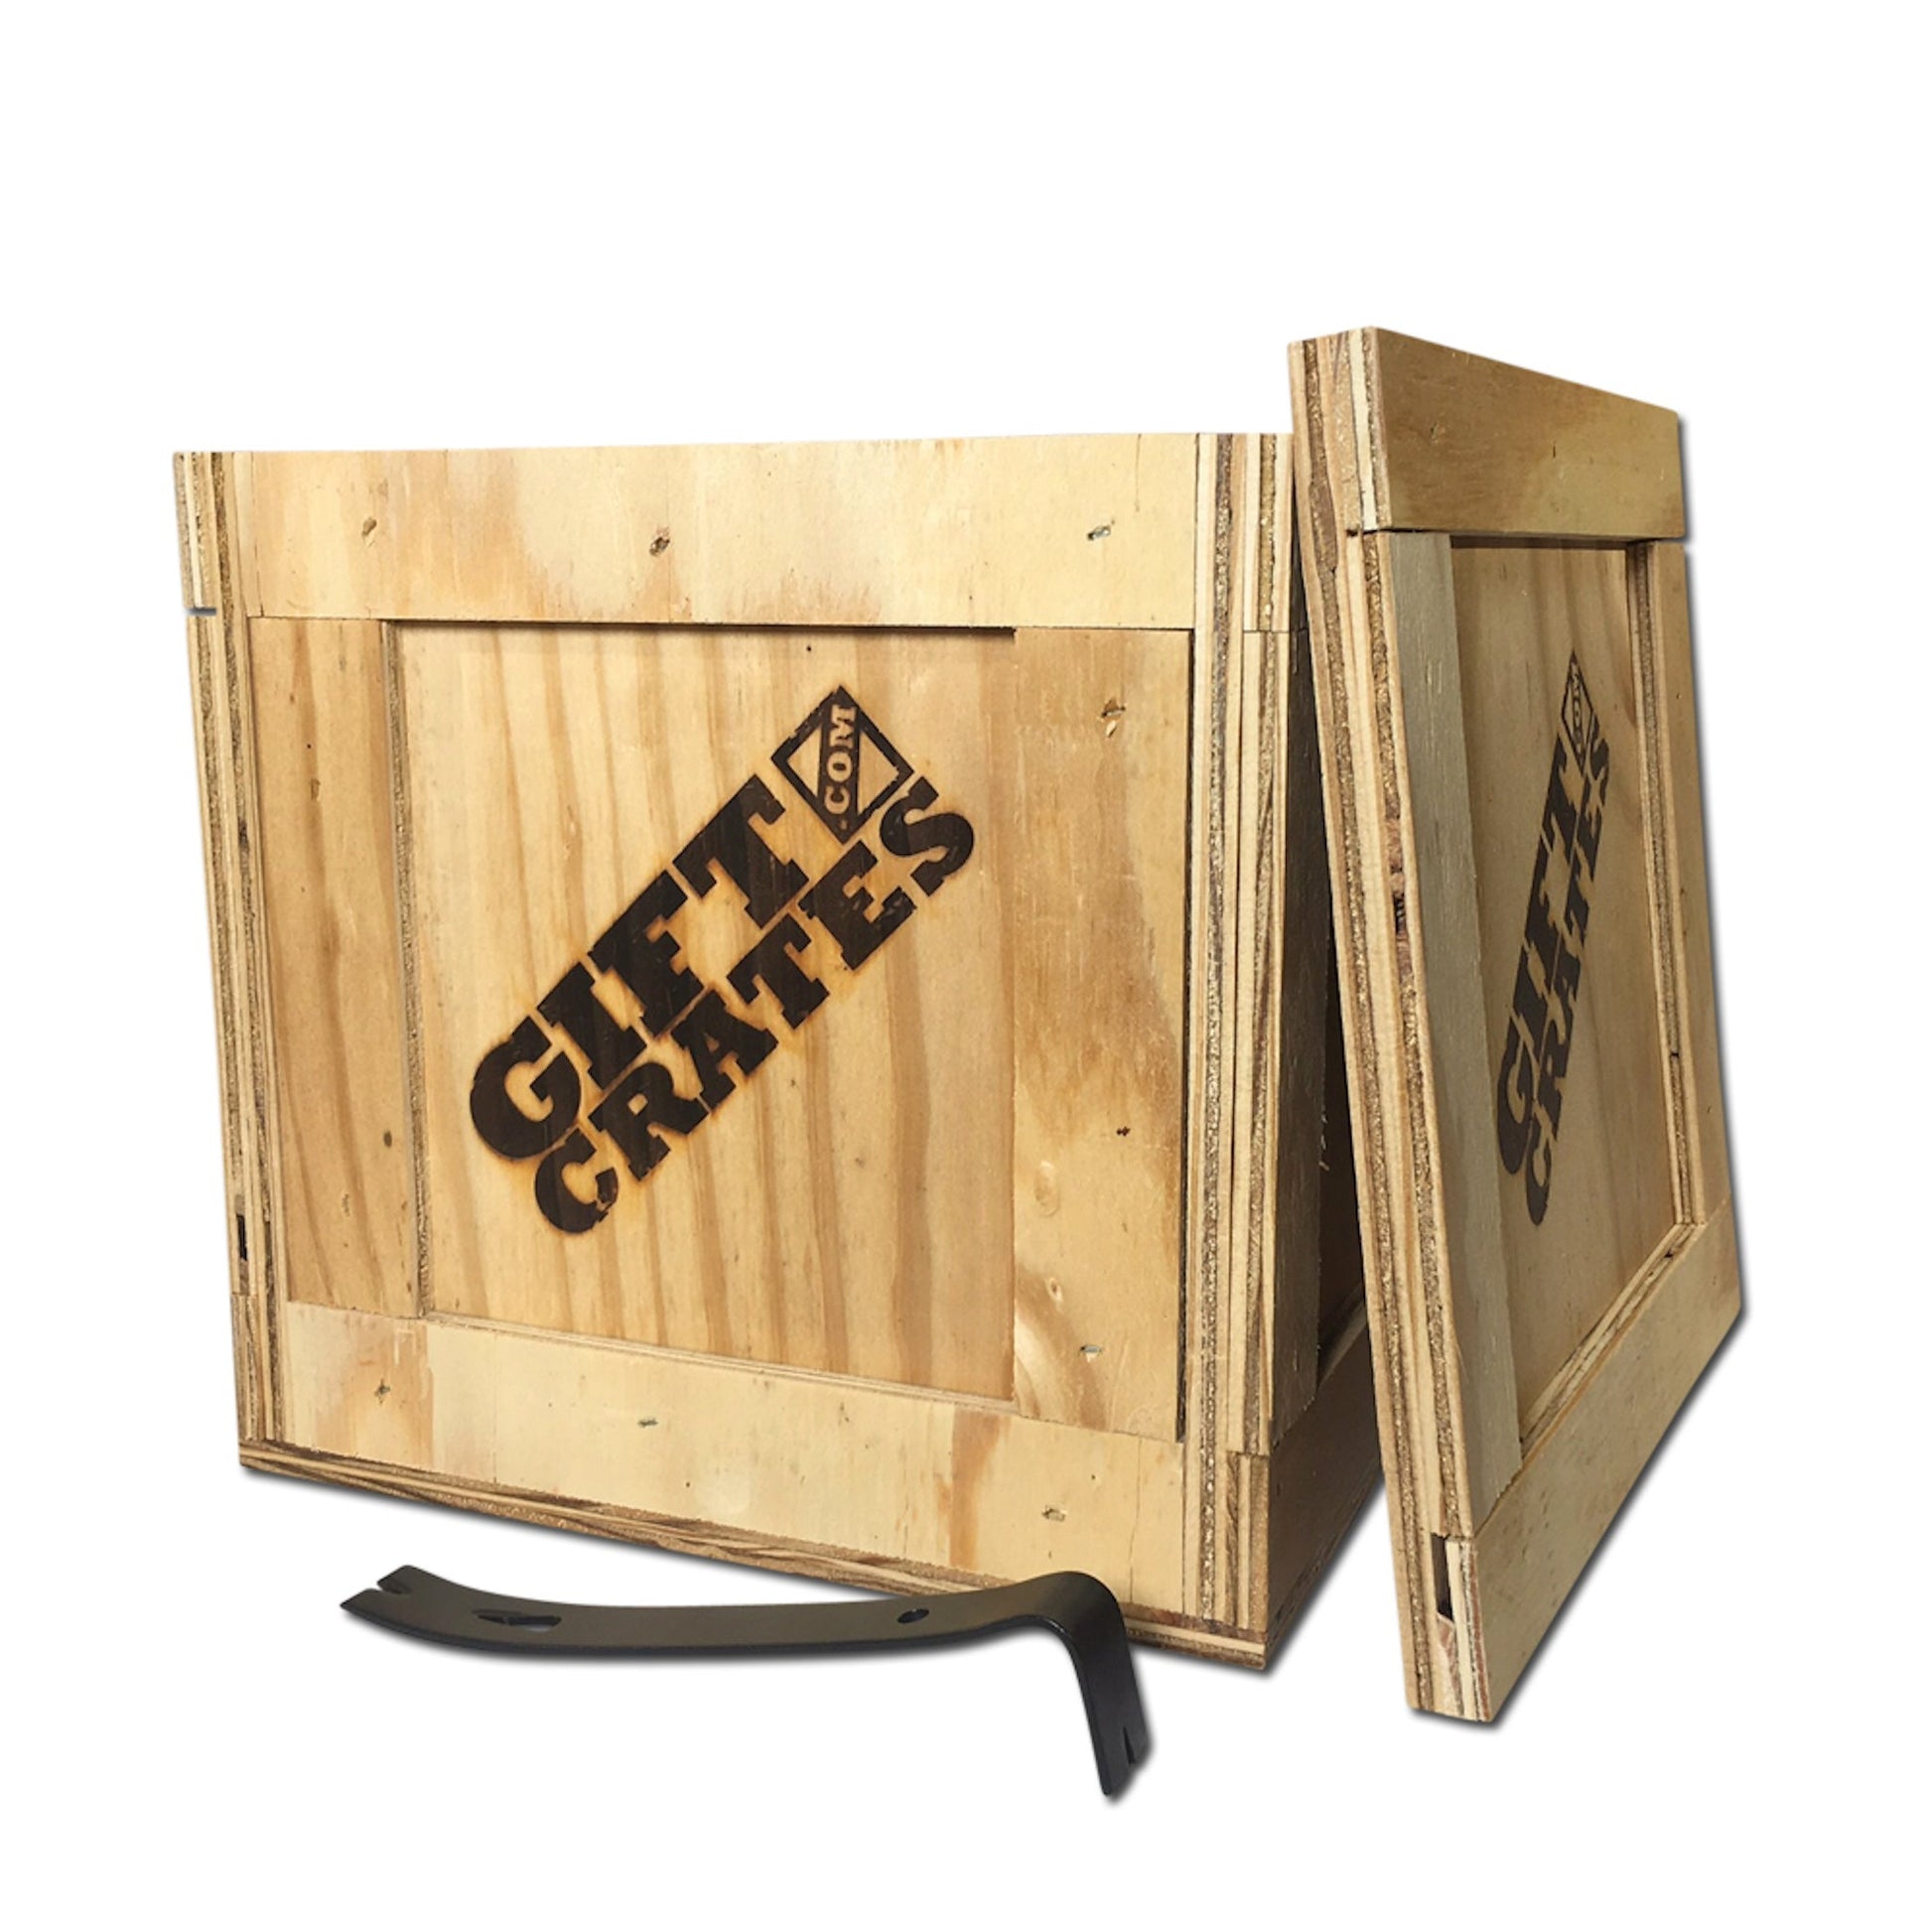 Football Tailgate Crate - Gift Crates